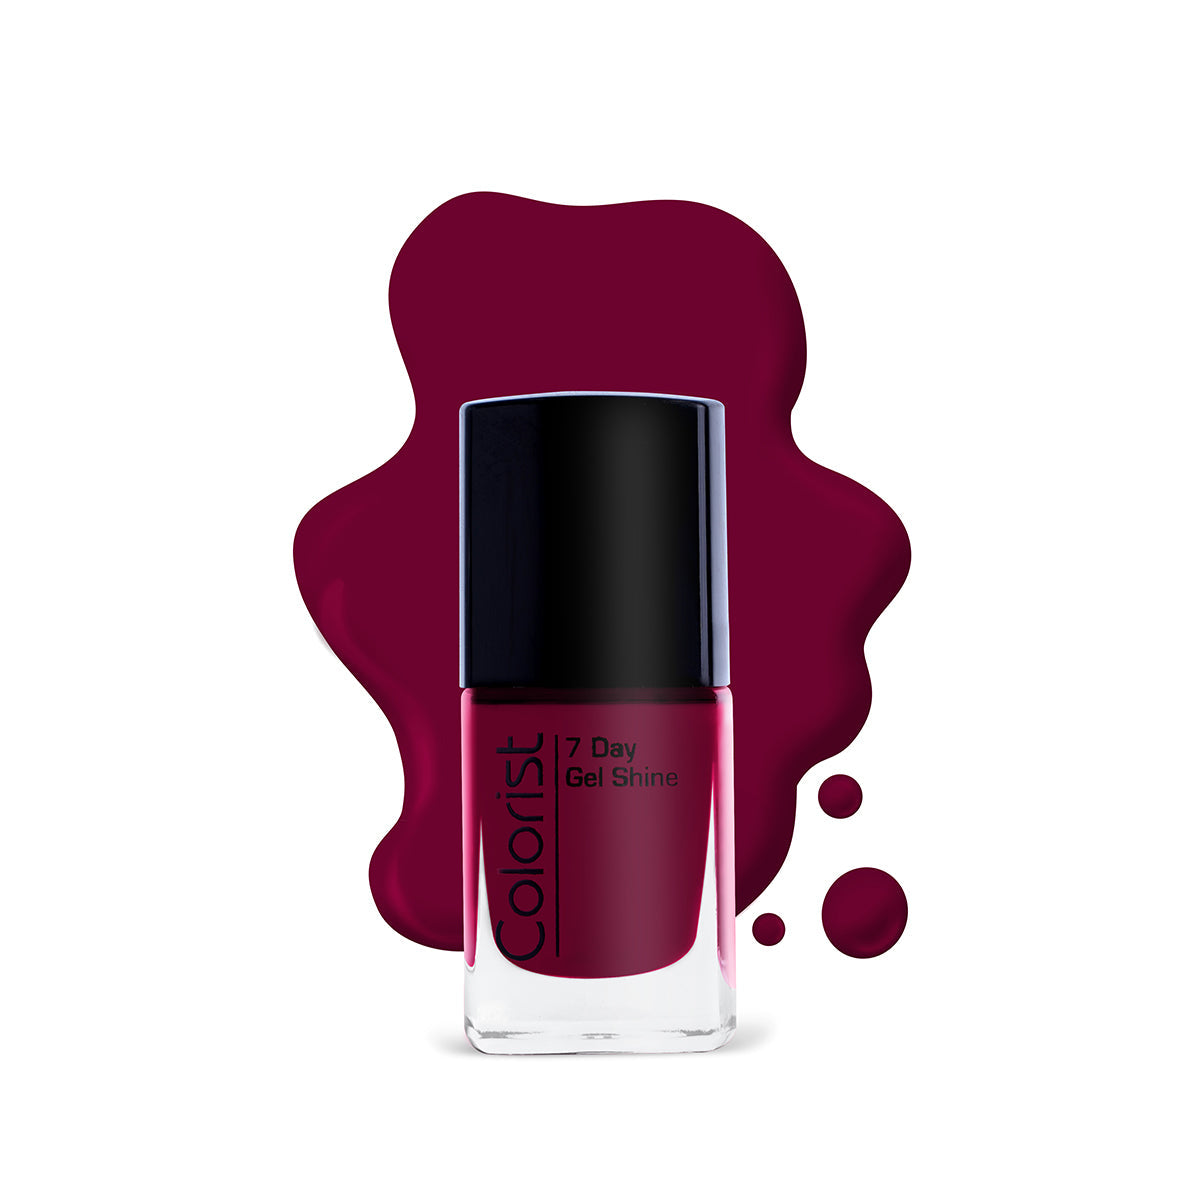 Buy  ST London - Colorist Nail Paint - ST001 - Moulin Rouge - at Best Price Online in Pakistan